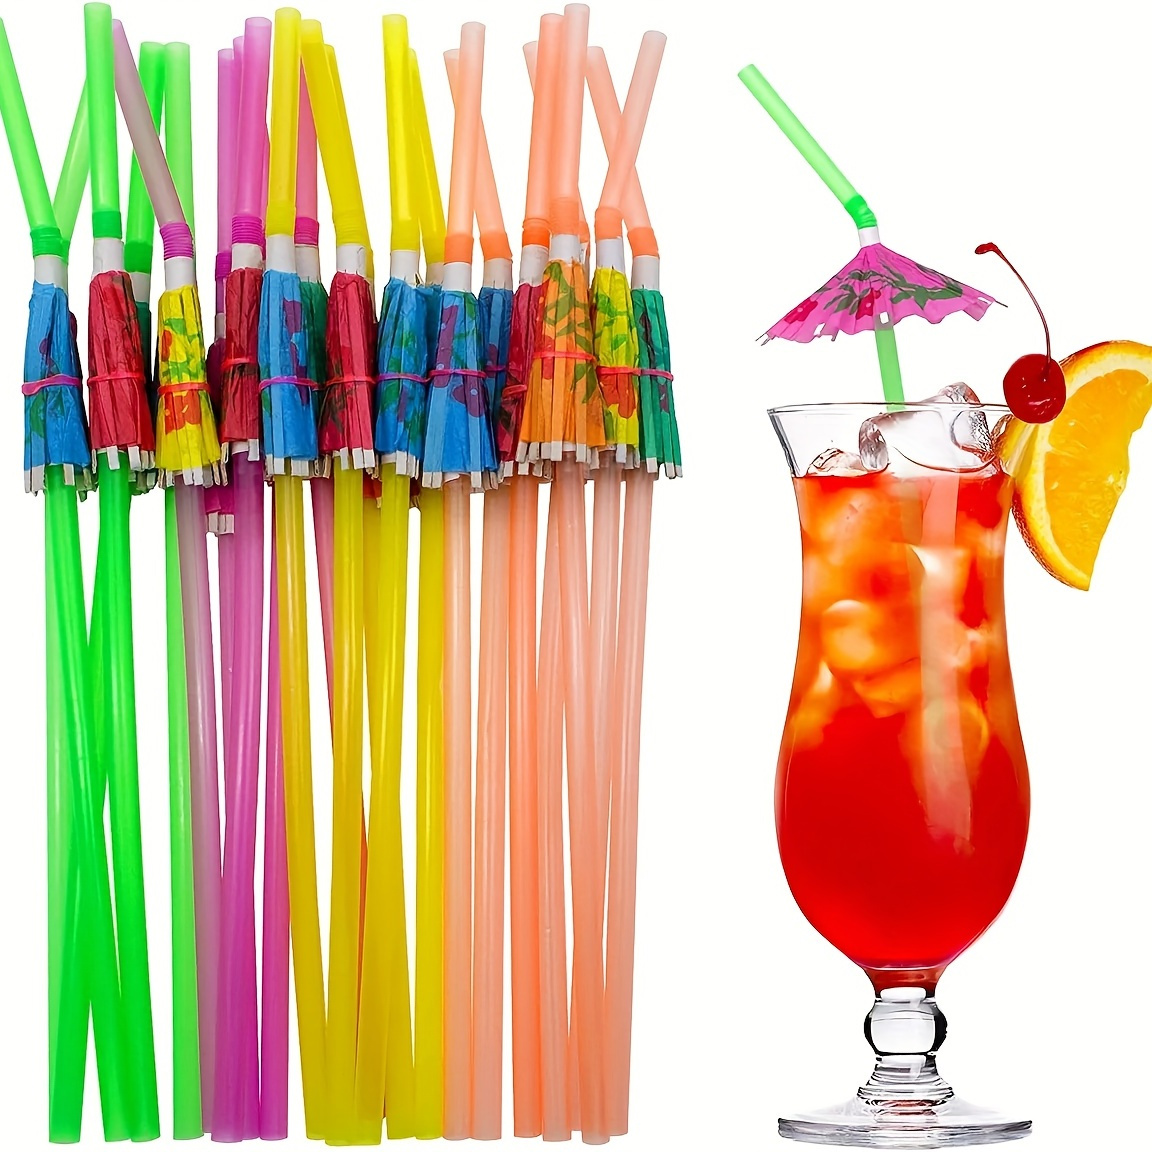 Extra Long BPA-Free Cocktail Straws 100 Pack. Each Clear, Disposable,  Straight Straw is Individually Wrapped. Strong, Slim 7.75in Size Makes a  Great